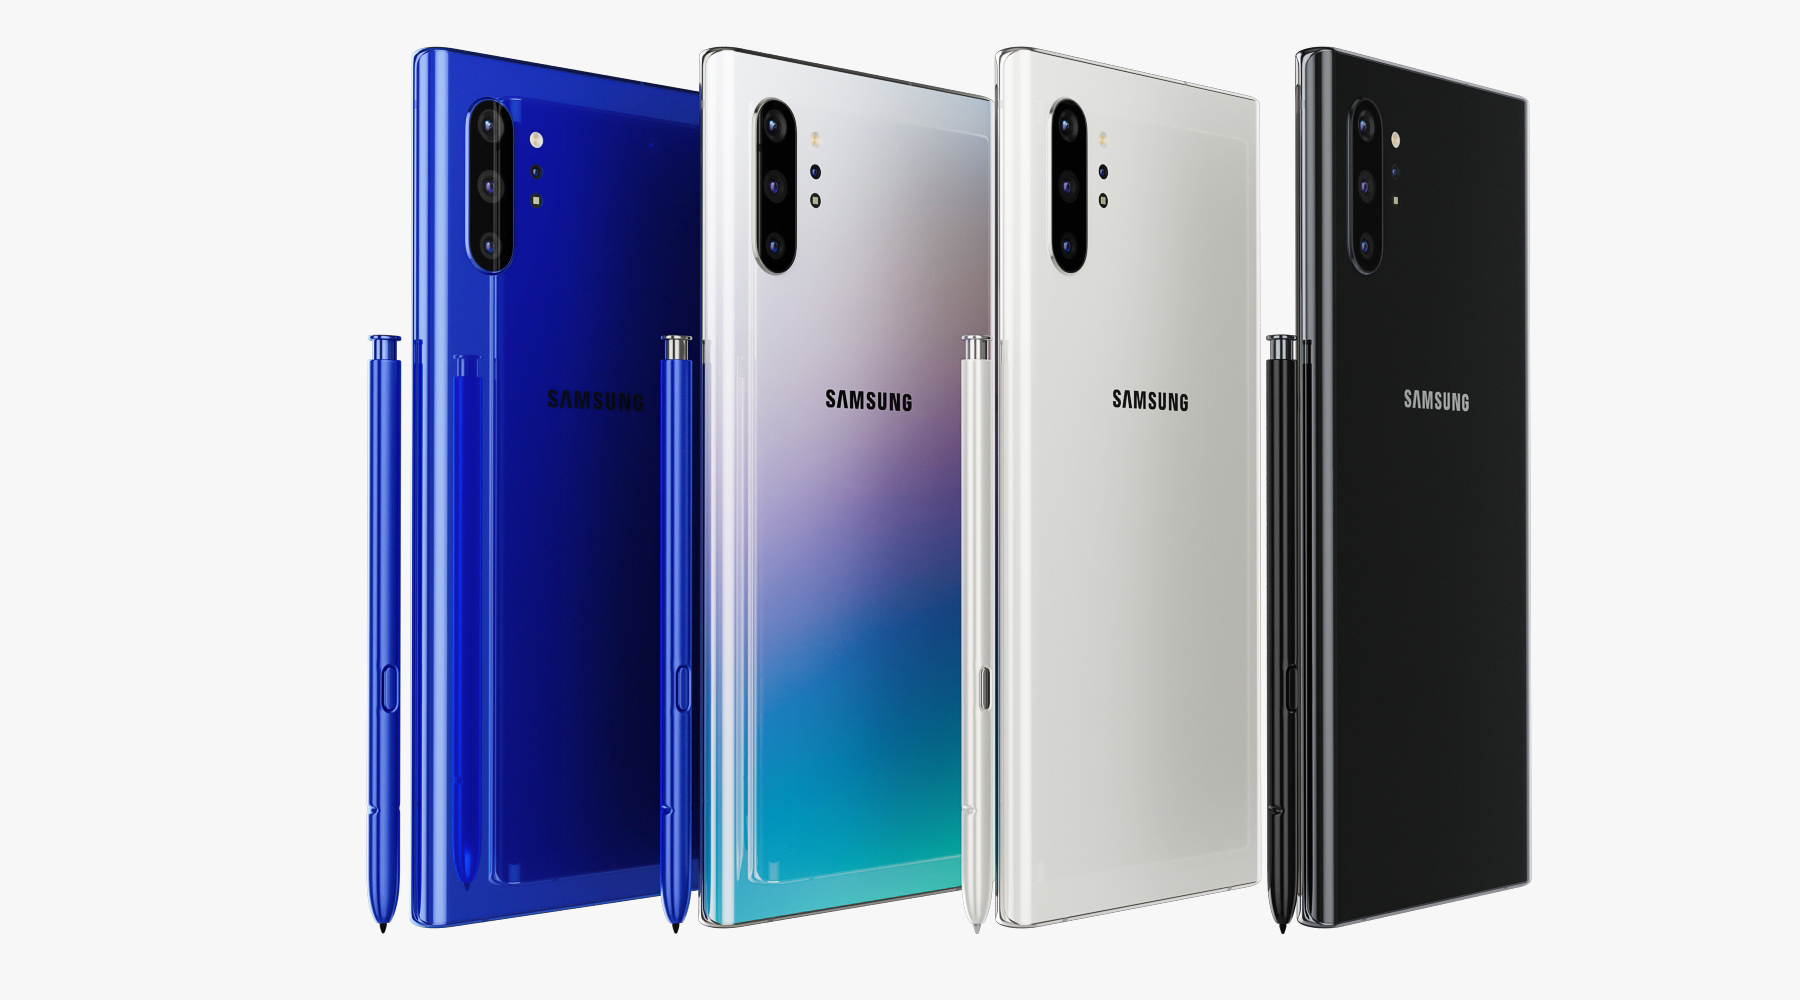 Samsung Galaxy Note 10 and Note 10 Plus All colors by madMIX_X | 3DOcean